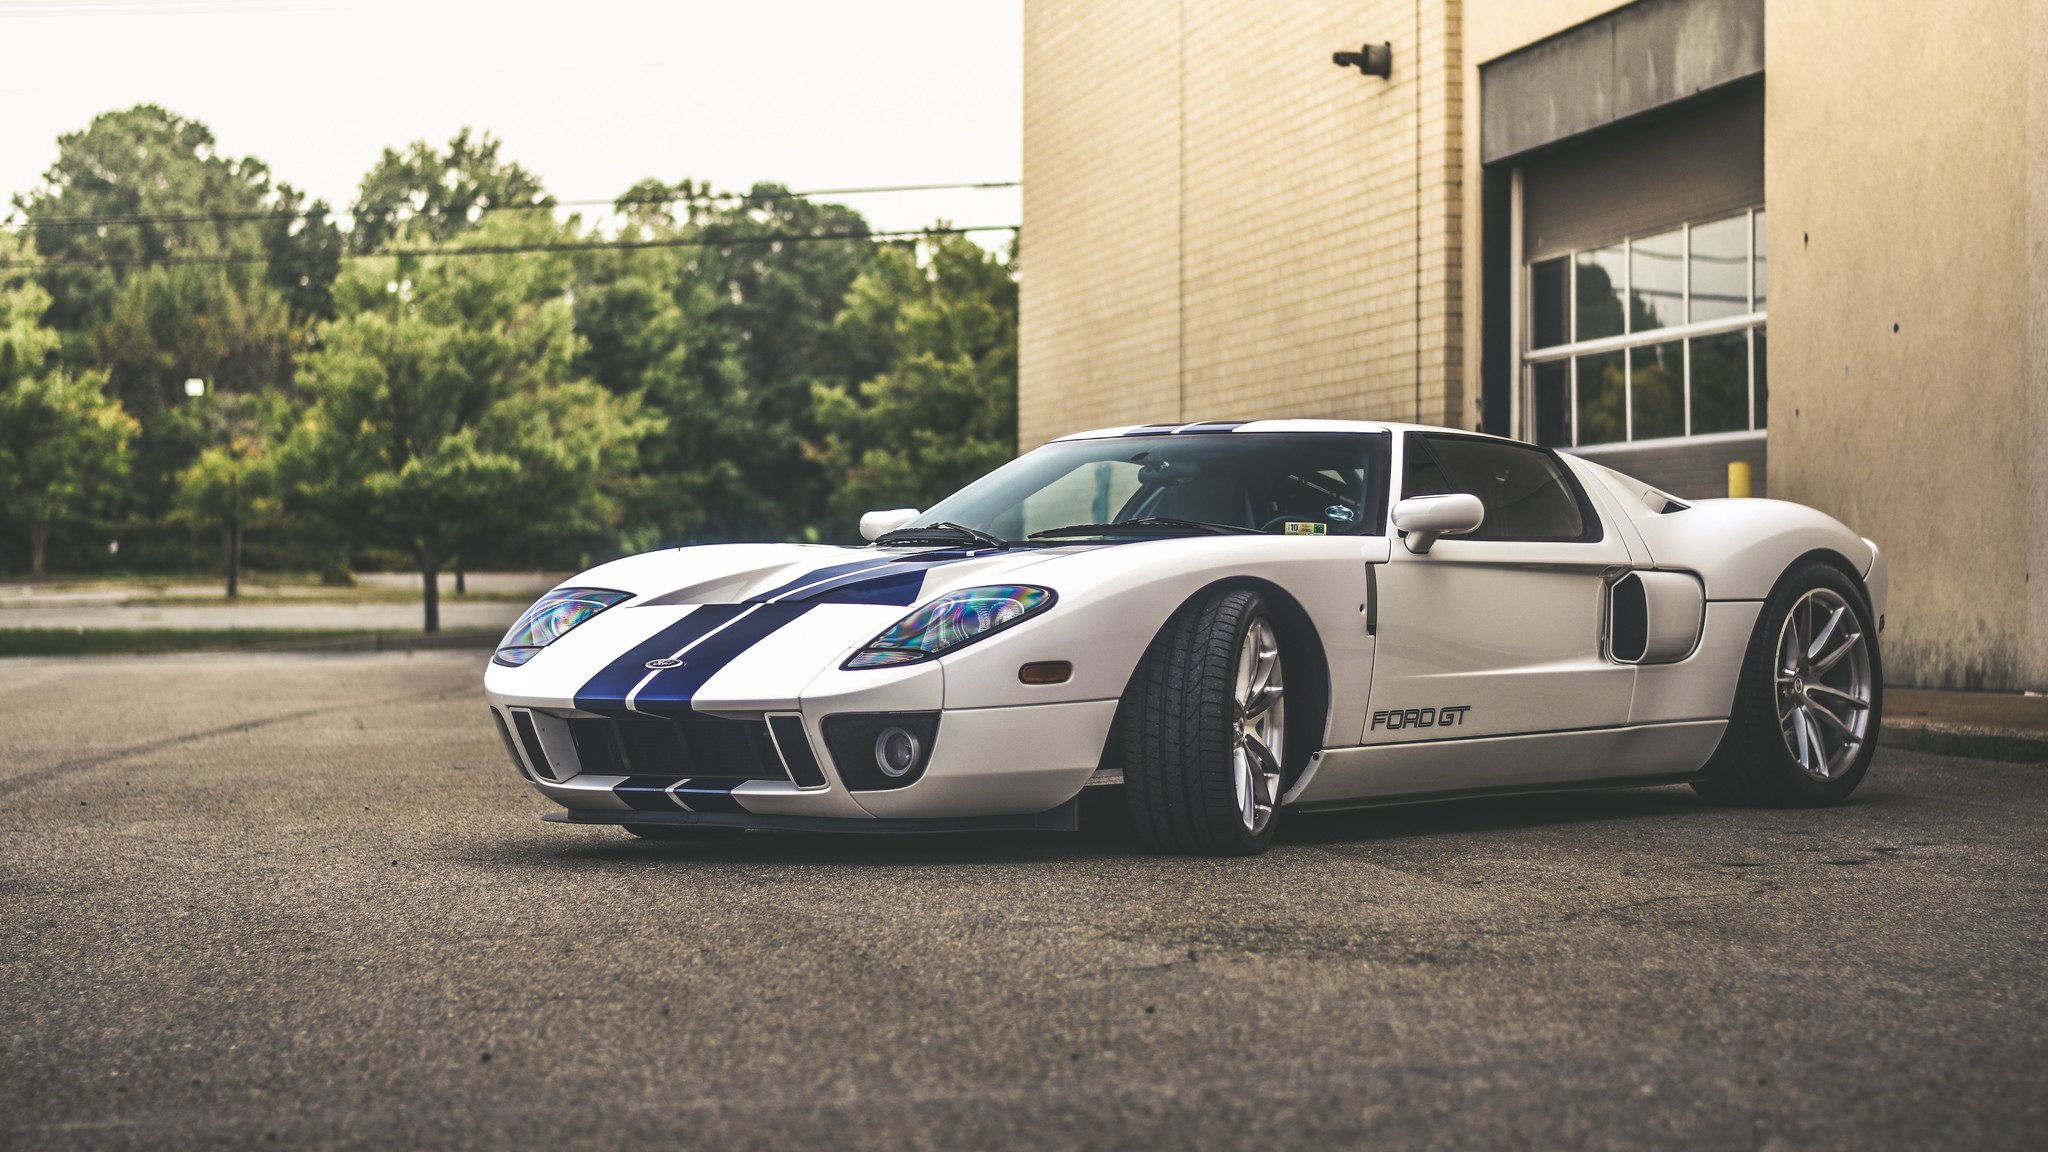 Aftermarket Side Scoops on White Ford GT - Photo by HRE Wheels